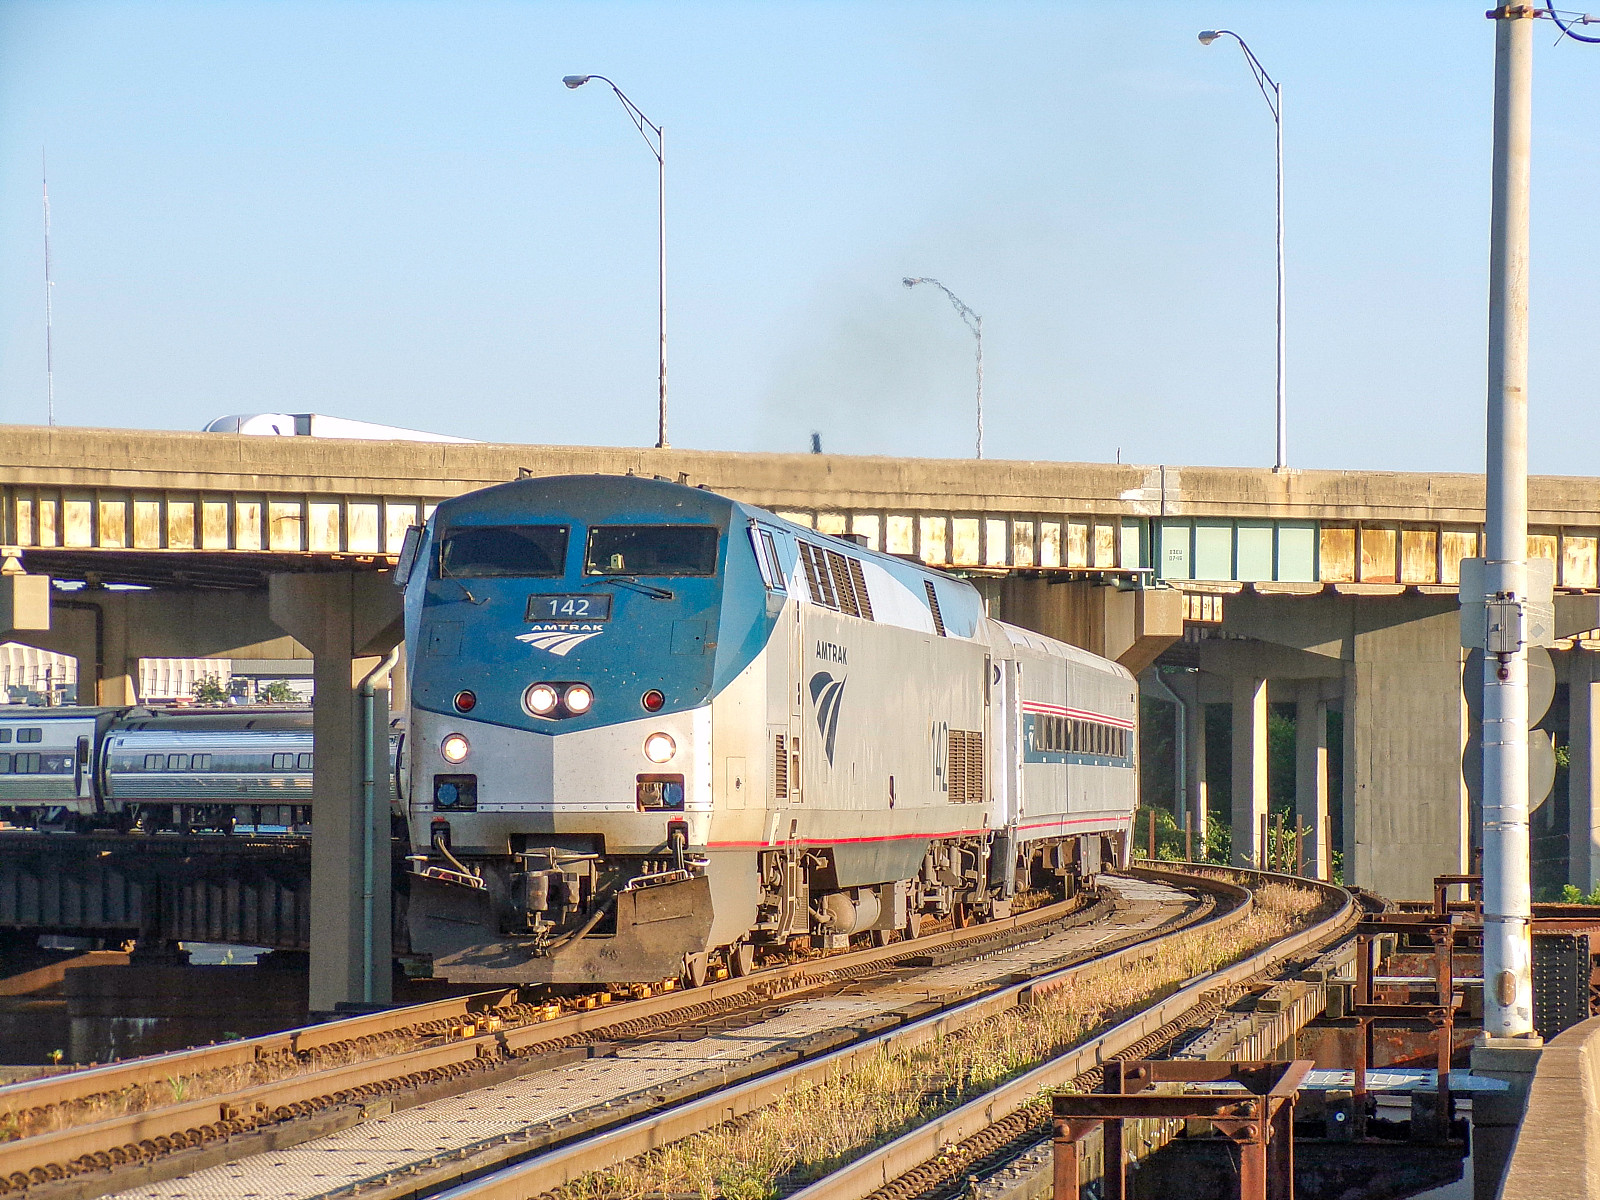 AMTK 142 is a class GE P42DC and  is pictured in Cincinnati, OH, United States.  This was taken along the CSX Cincinnati Terminal Subdivision on the Amtrak. Photo Copyright: David Rohdenburg uploaded to Railroad Gallery on 01/14/2023. This photograph of AMTK 142 was taken on Sunday, August 11, 2019. All Rights Reserved. 